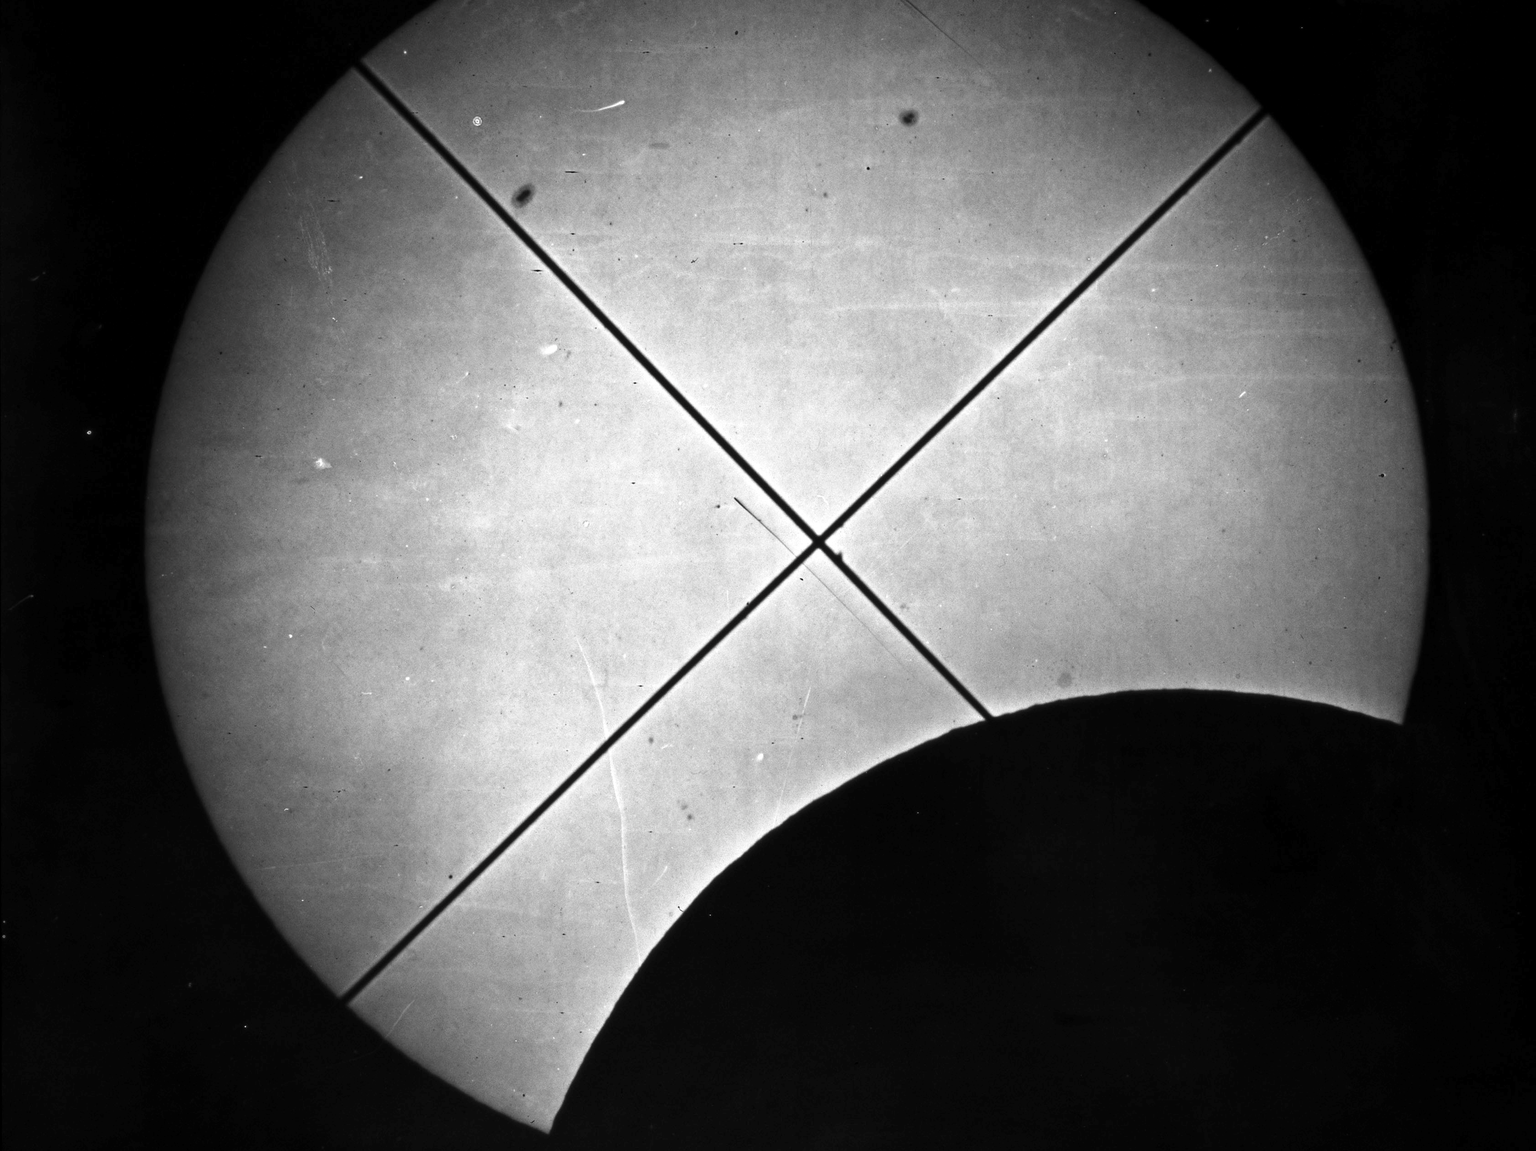 An expedition photograph of the eclipse before totality (Science Museum).